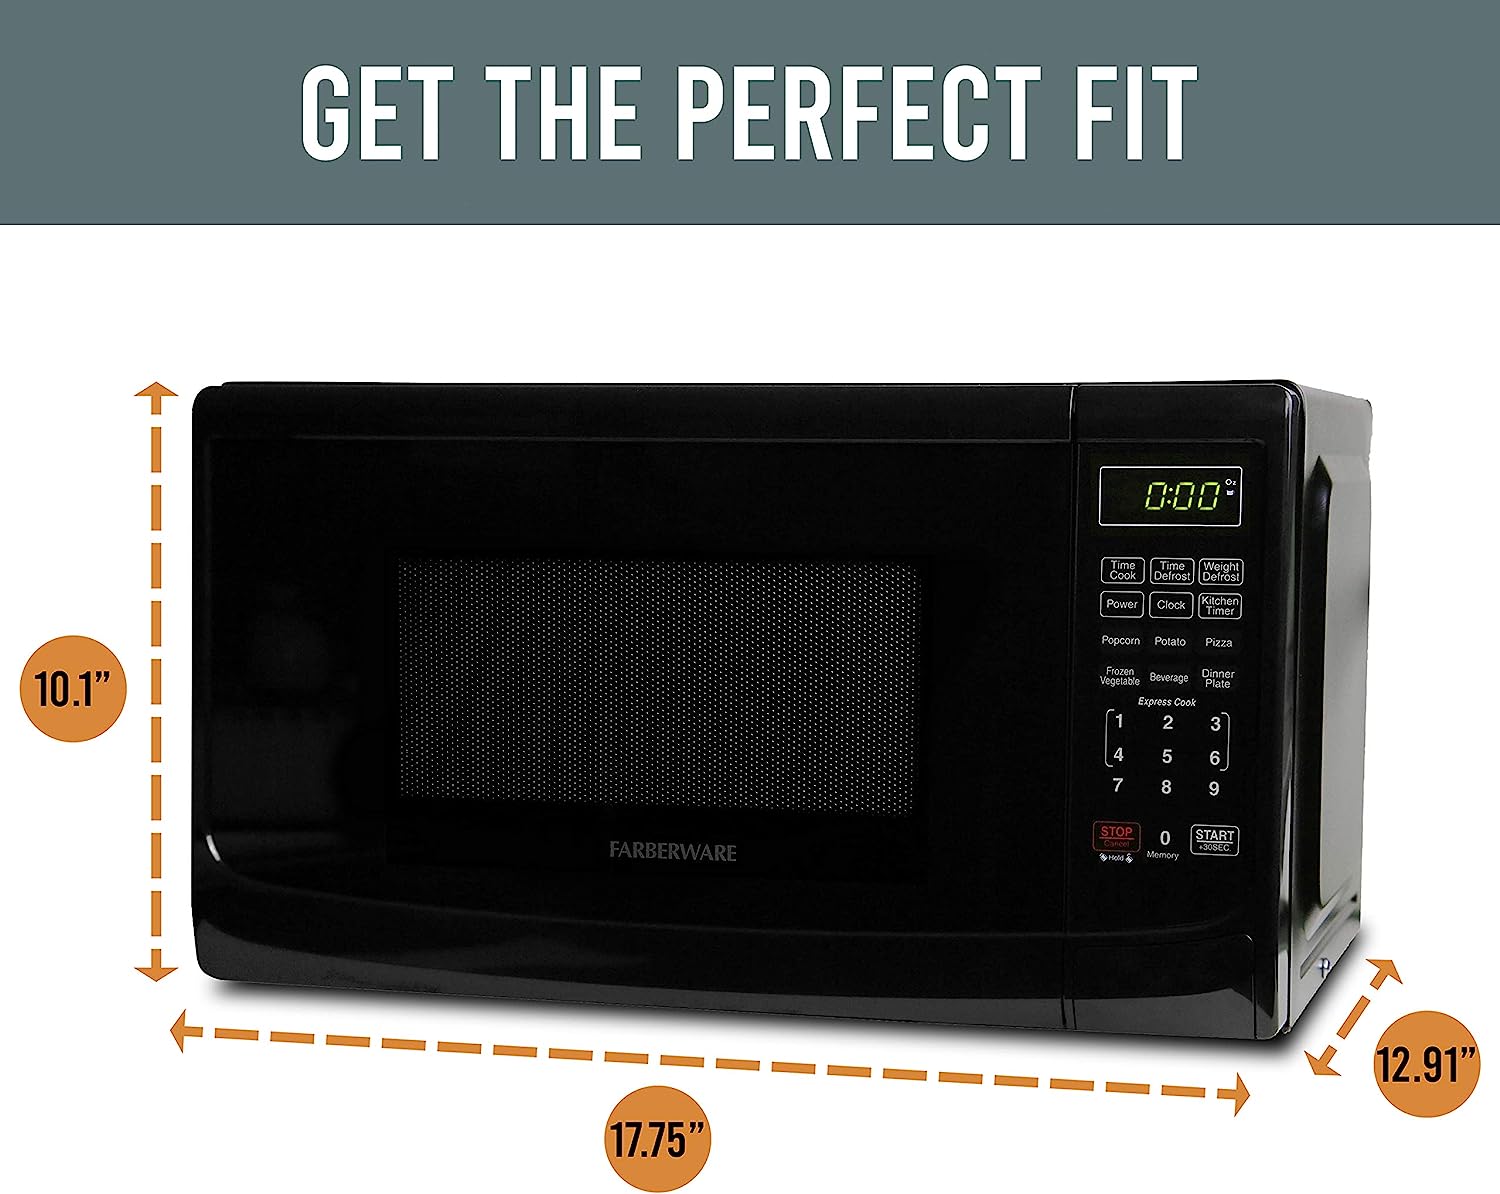 https://bigbigmart.com/wp-content/uploads/2023/07/Farberware-Countertop-Microwave-700-Watts-0.7-cu-ft-Microwave-Oven-With-LED-Lighting-and-Child-Lock-Perfect-for-Apartments-and-Dorms-Easy-Clean-Grey-Interior-Retro-Black3.jpg